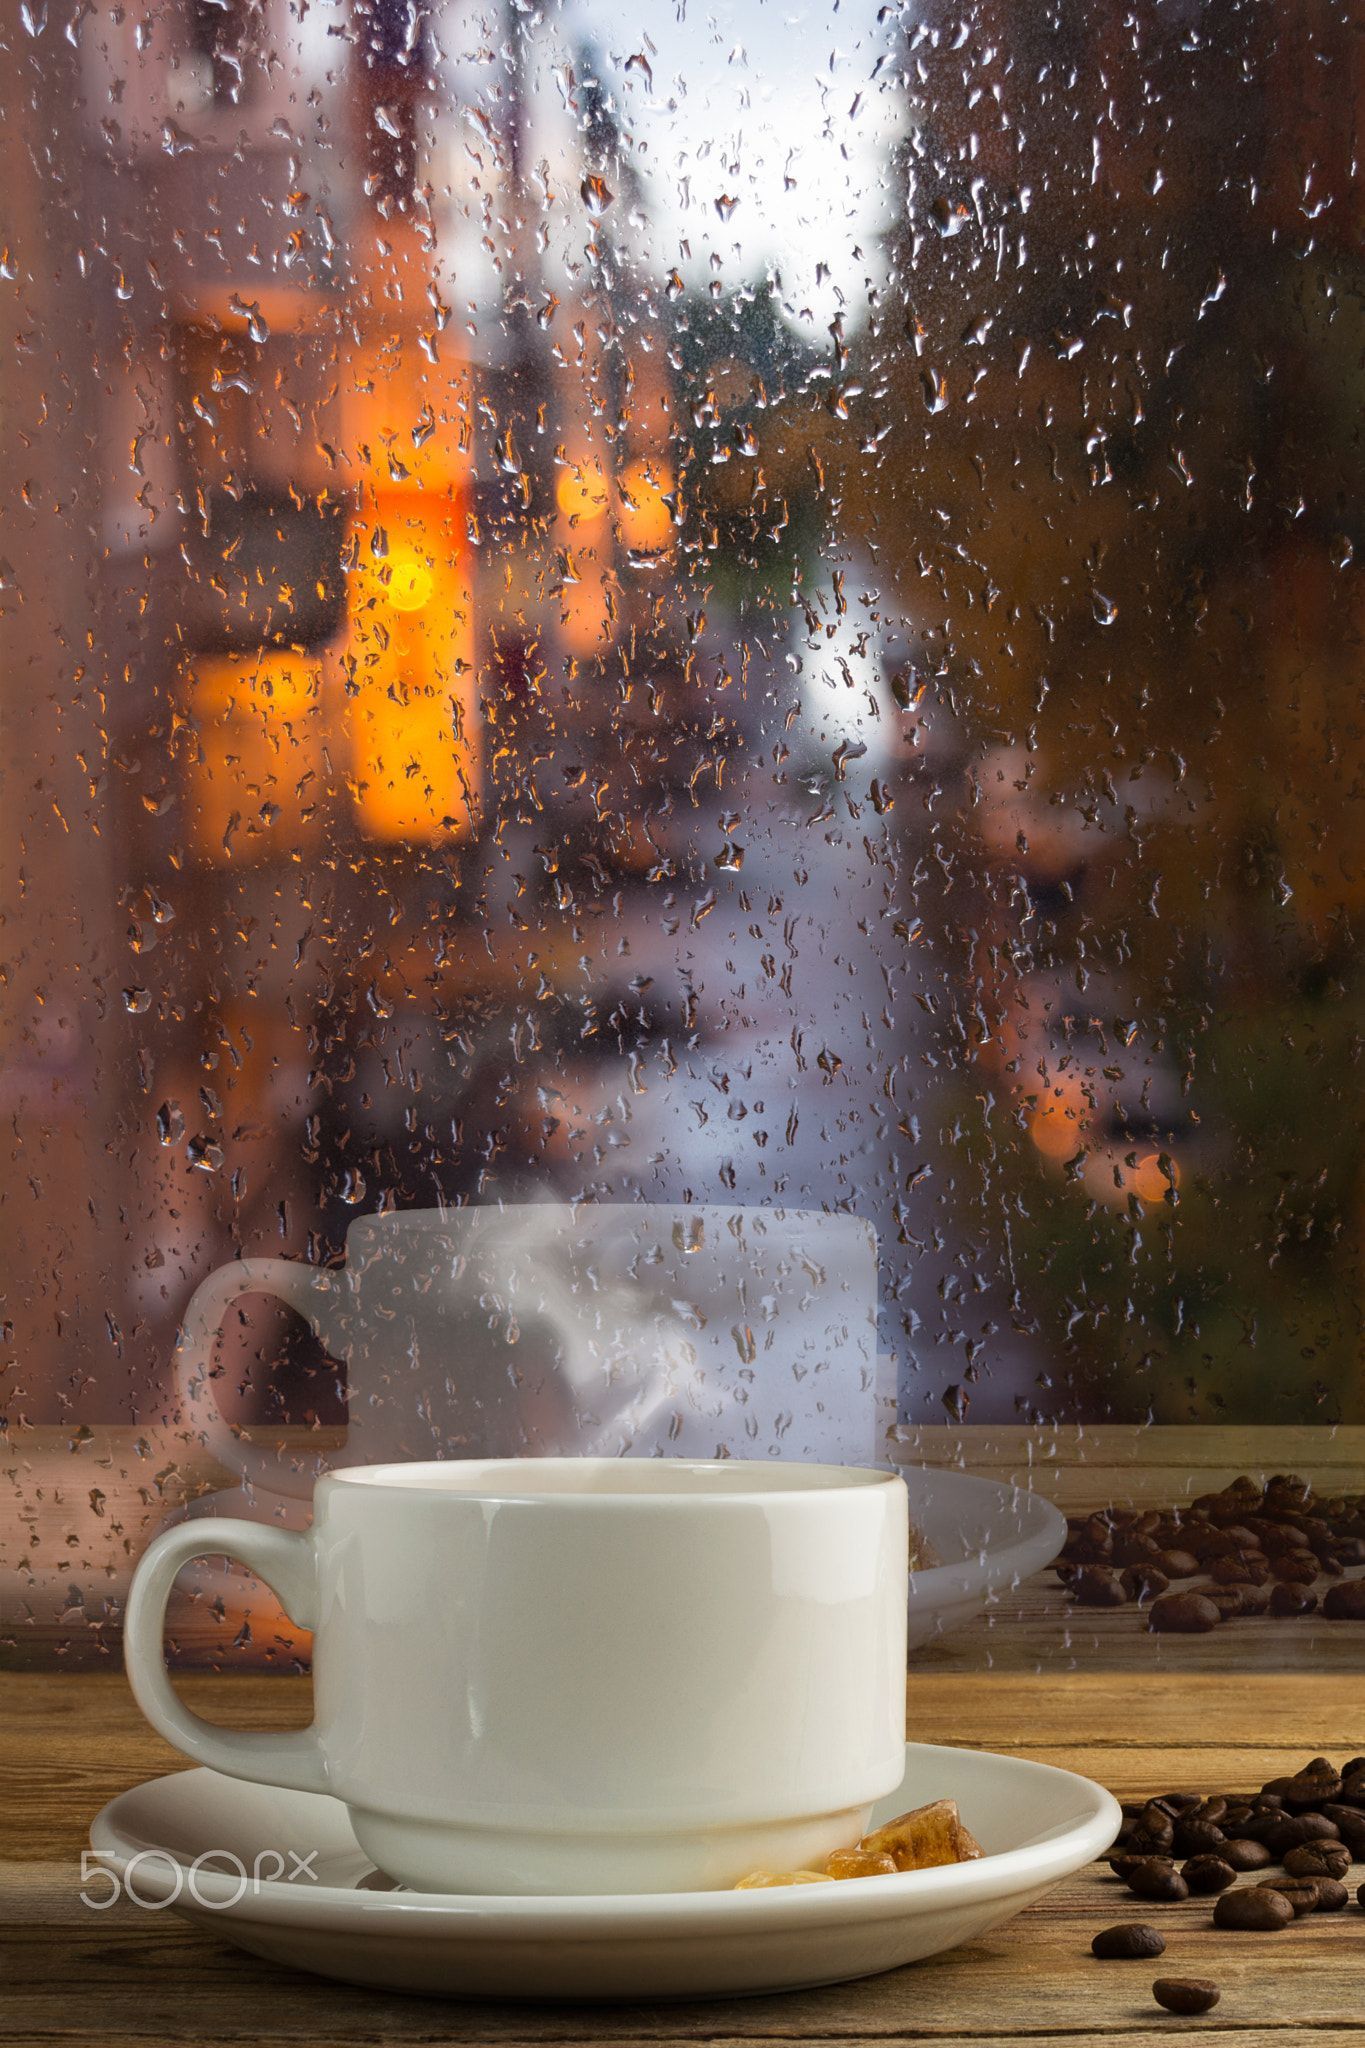 Cup of strong coffee on the rainy window background of strong coffee on the rainy window background. M. Rain and coffee, Rainy window, Rainy day photography